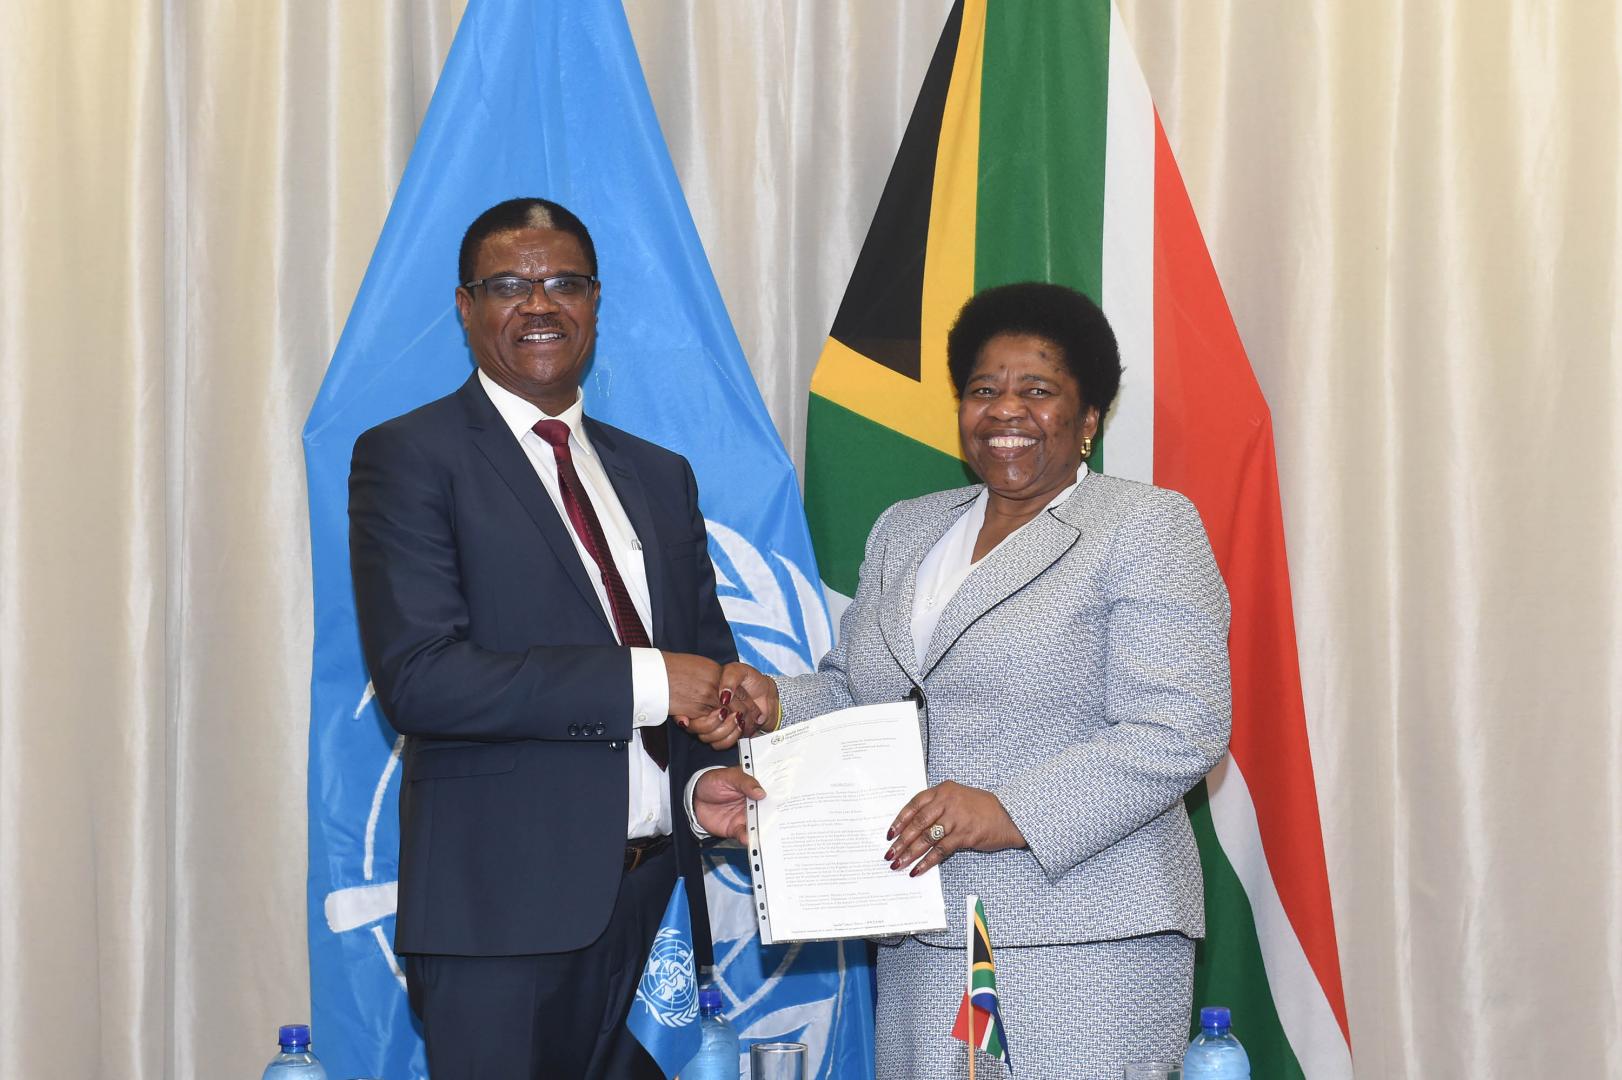 South African Deputy Foreign Minister Candith Mashego-Dlamini shaking hands with a WHO official.